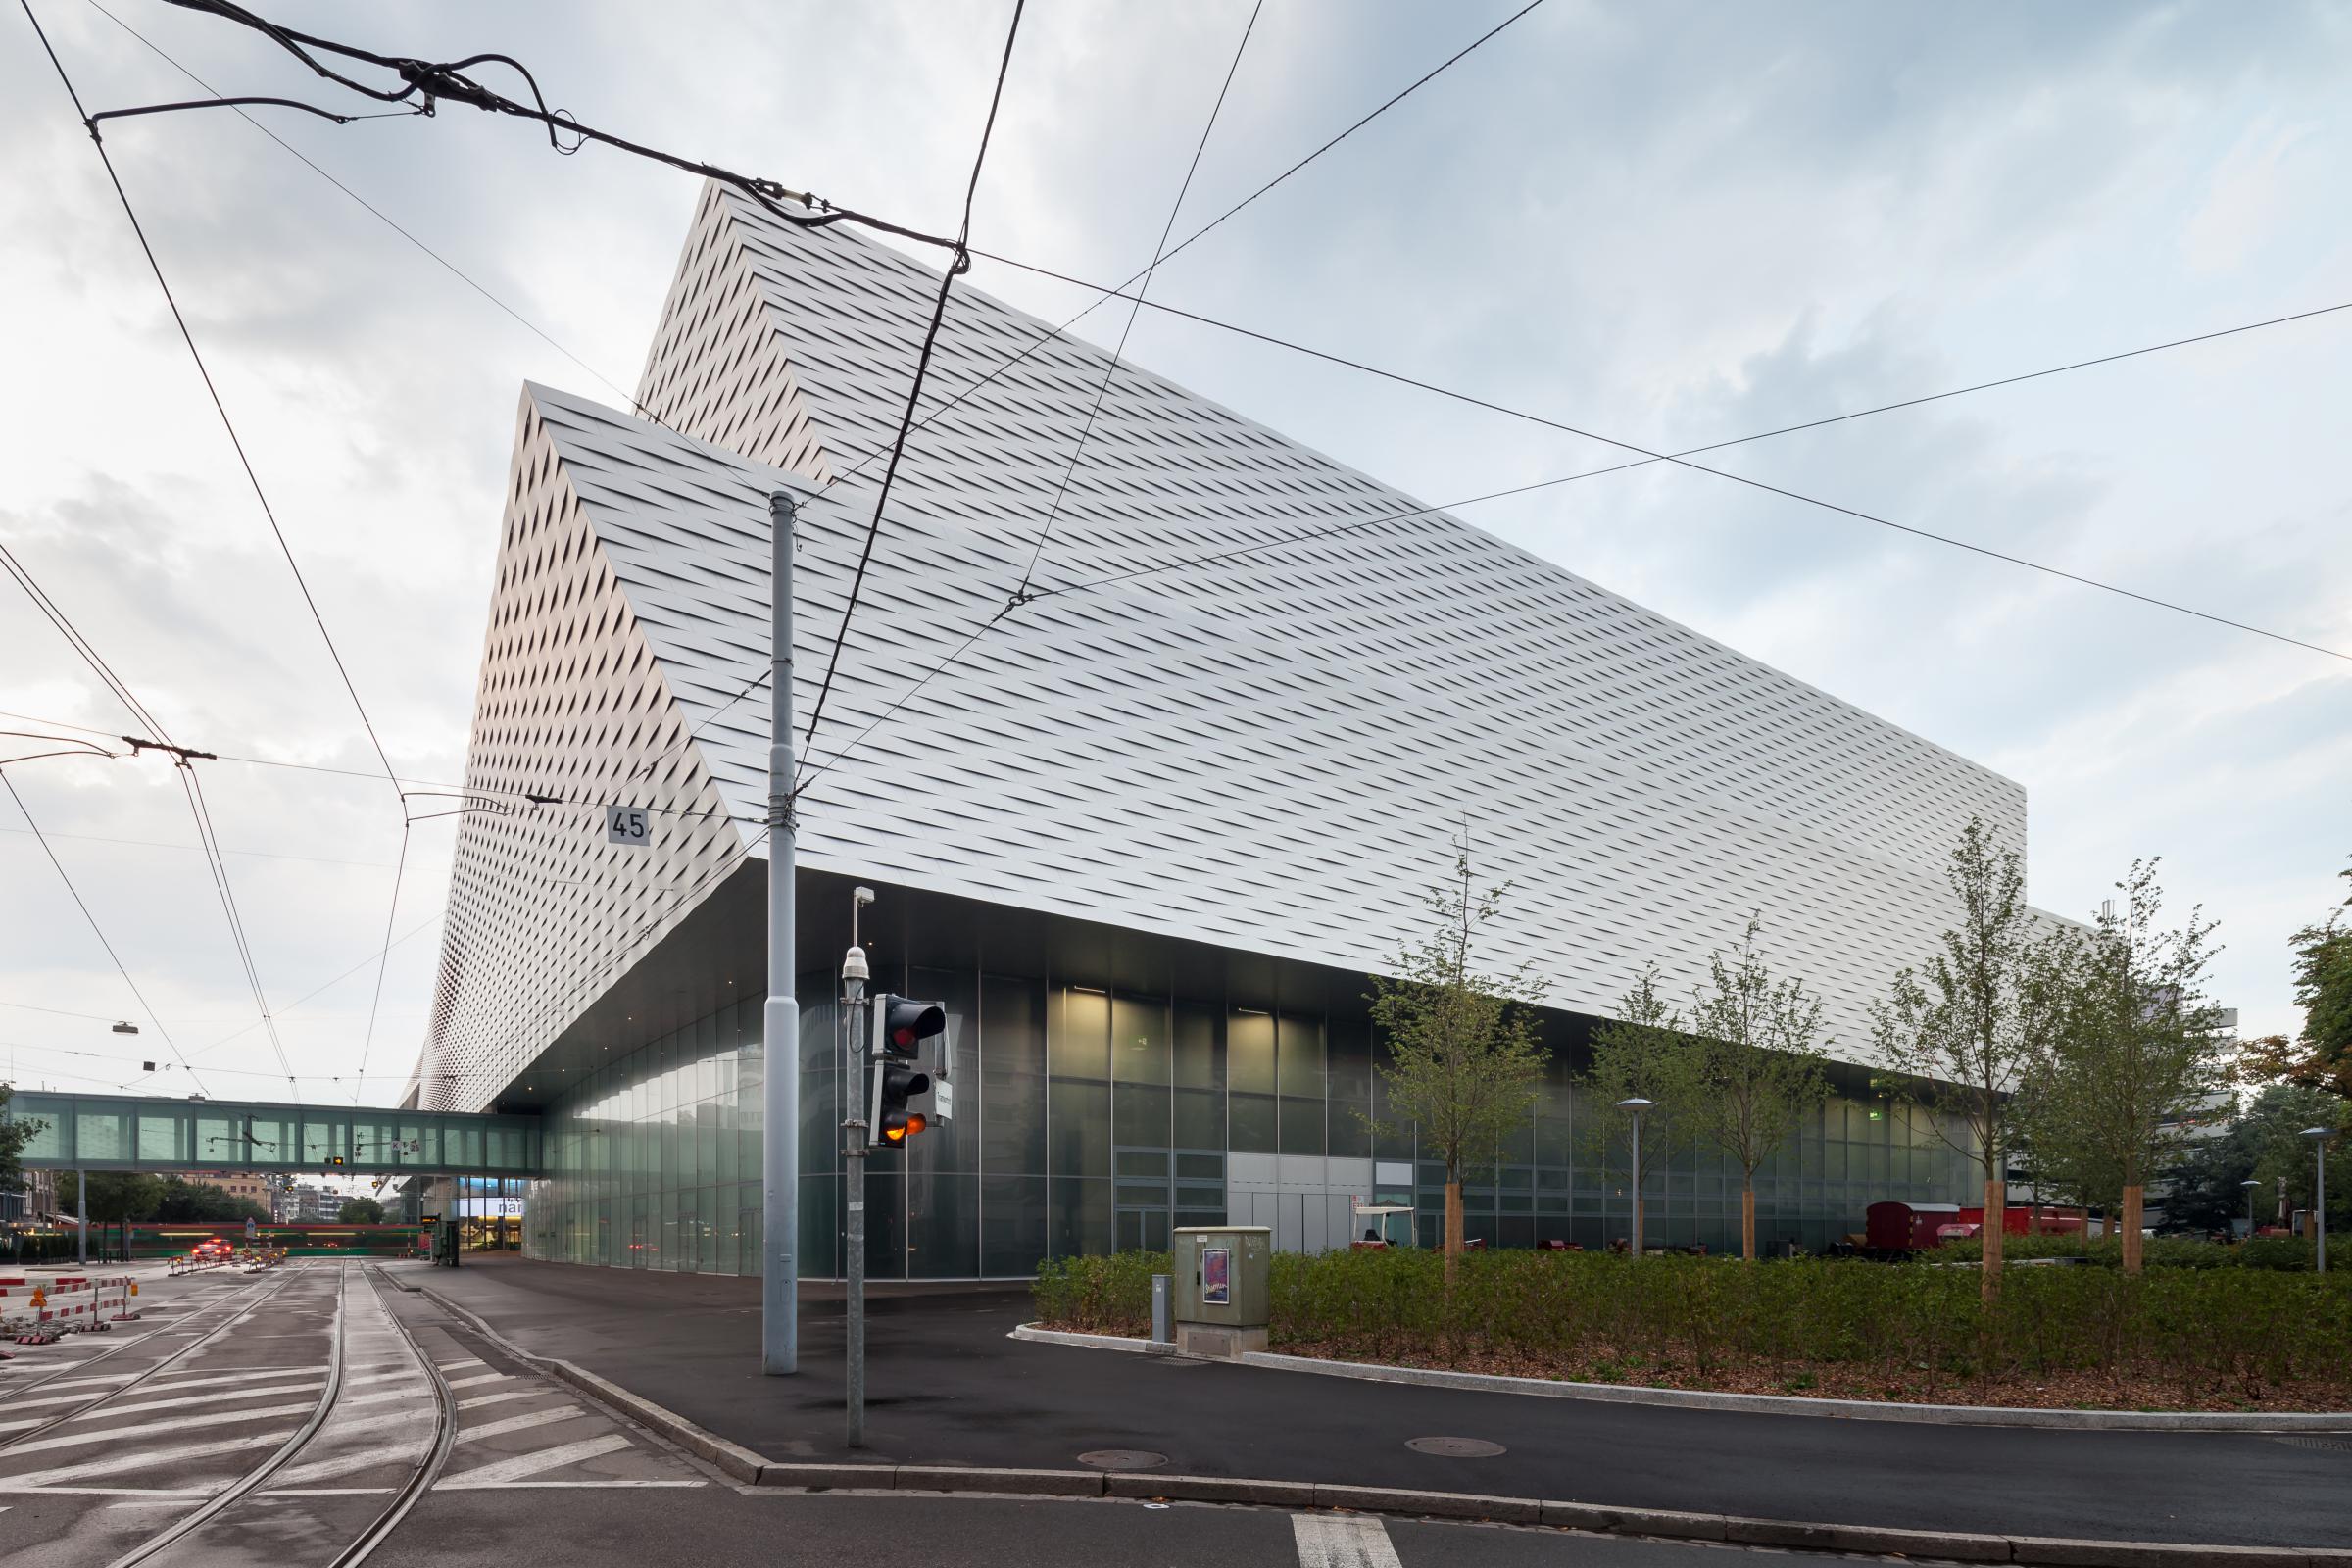 Photograph of Messe Basel New Hall, designed by Herzog & de Meuron and located in Basel, Switzerland